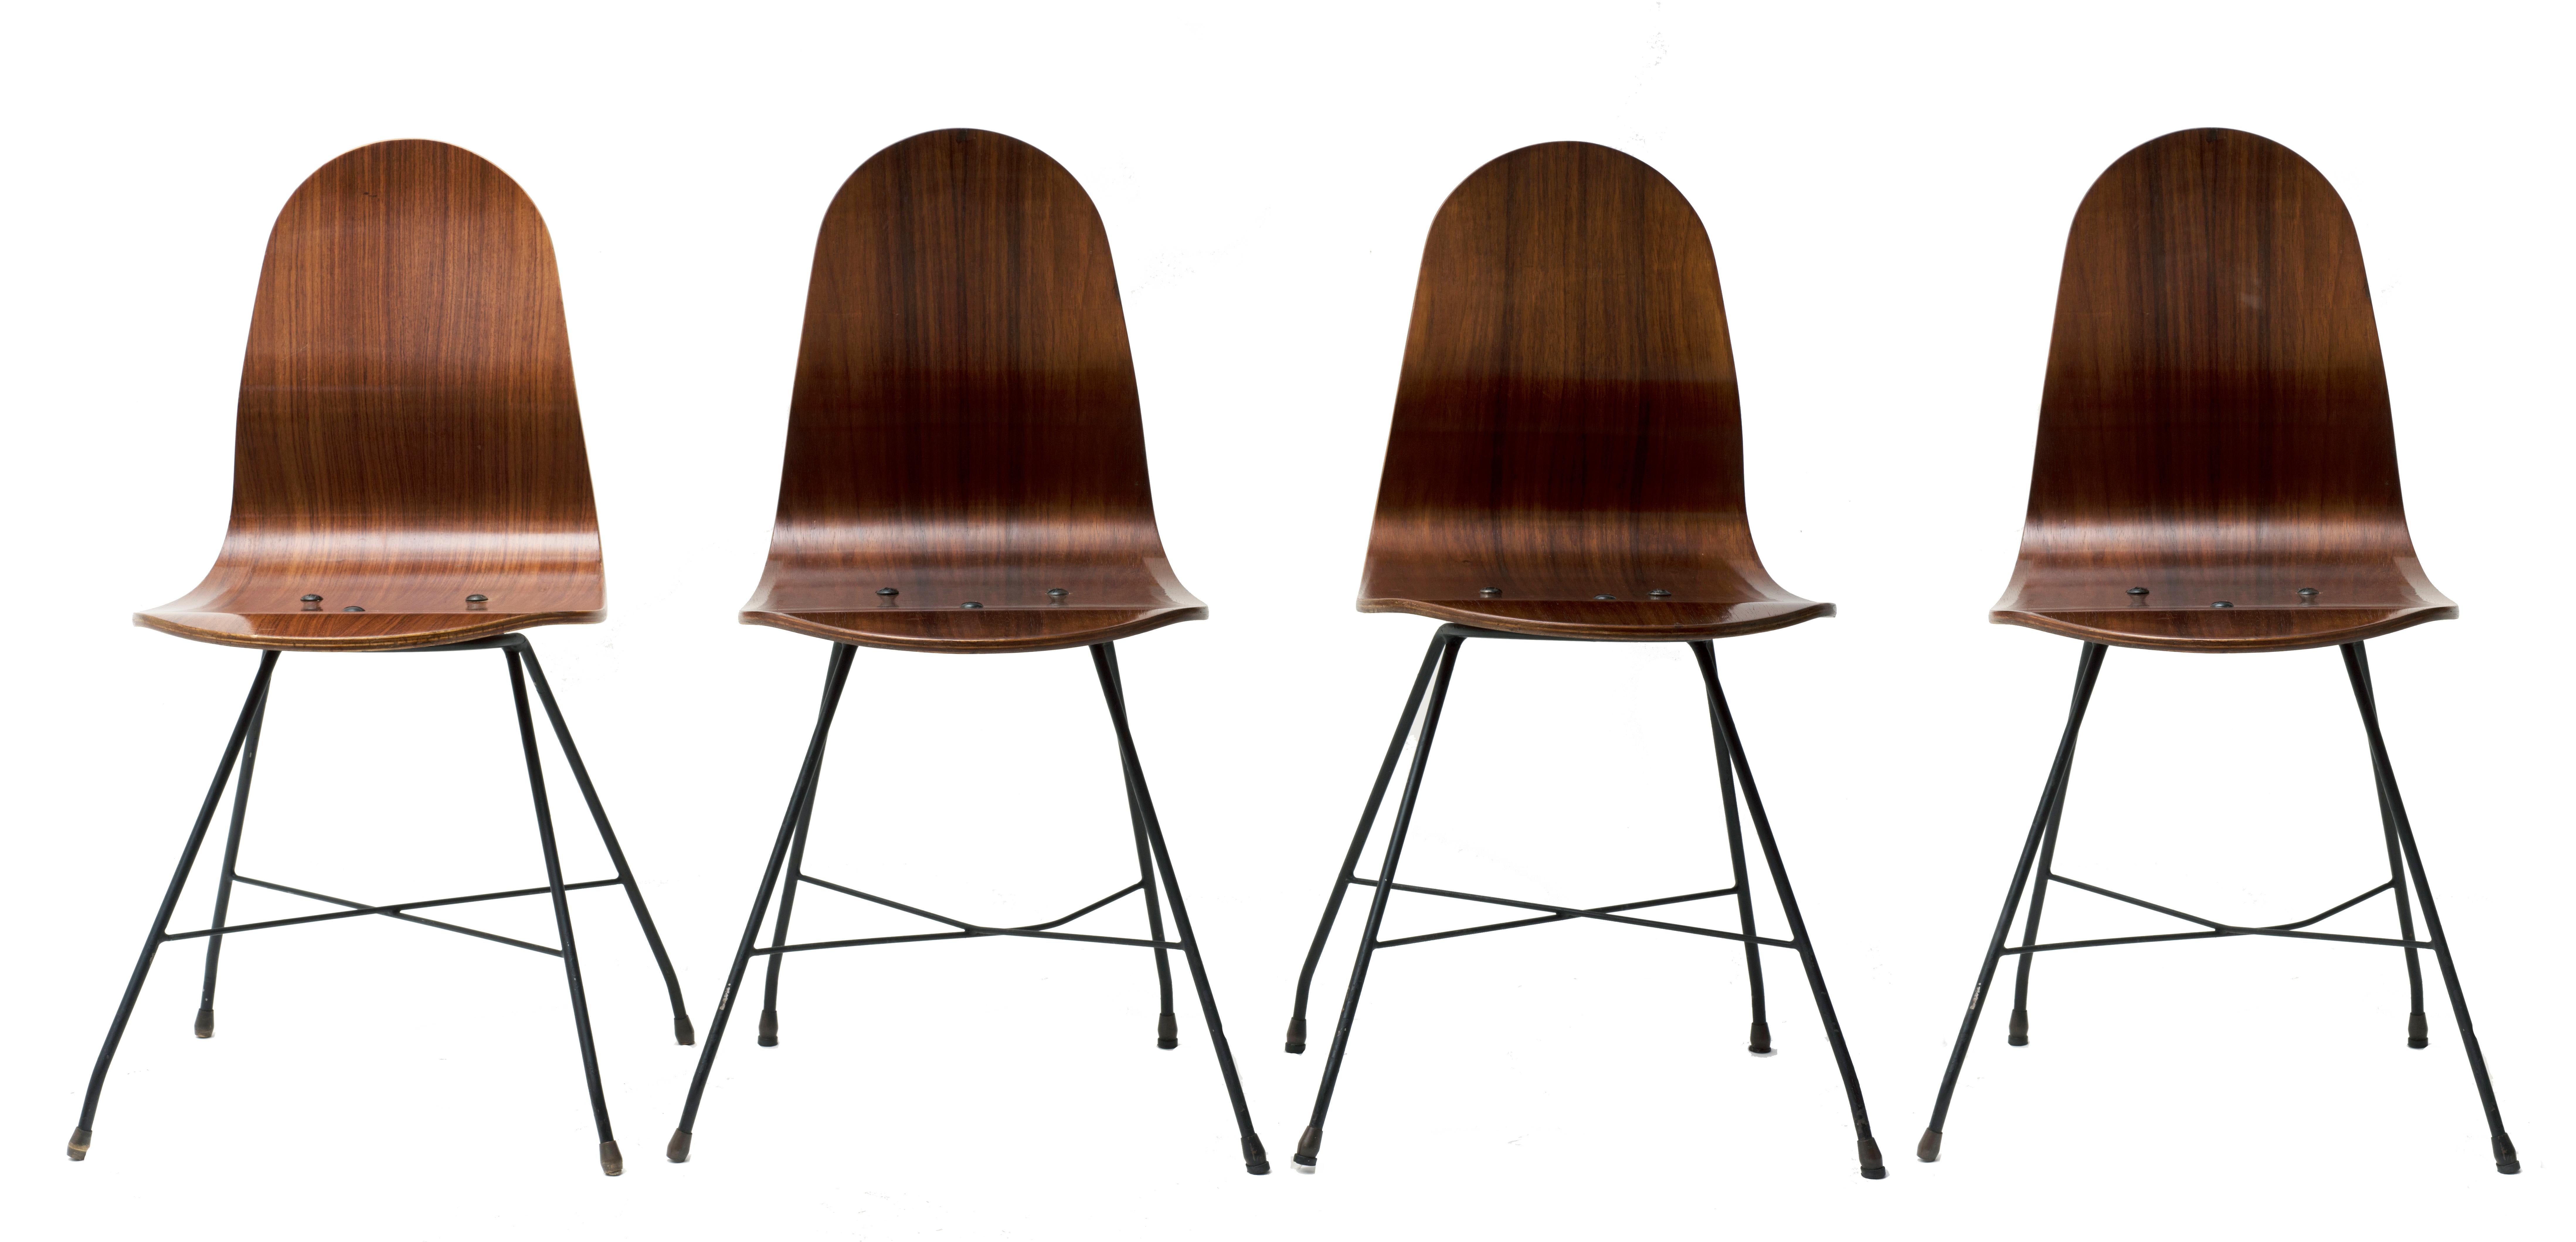 Italian Four Vintage Wooden Chairs by Franco Campo and Carlo Graffi, 1950s